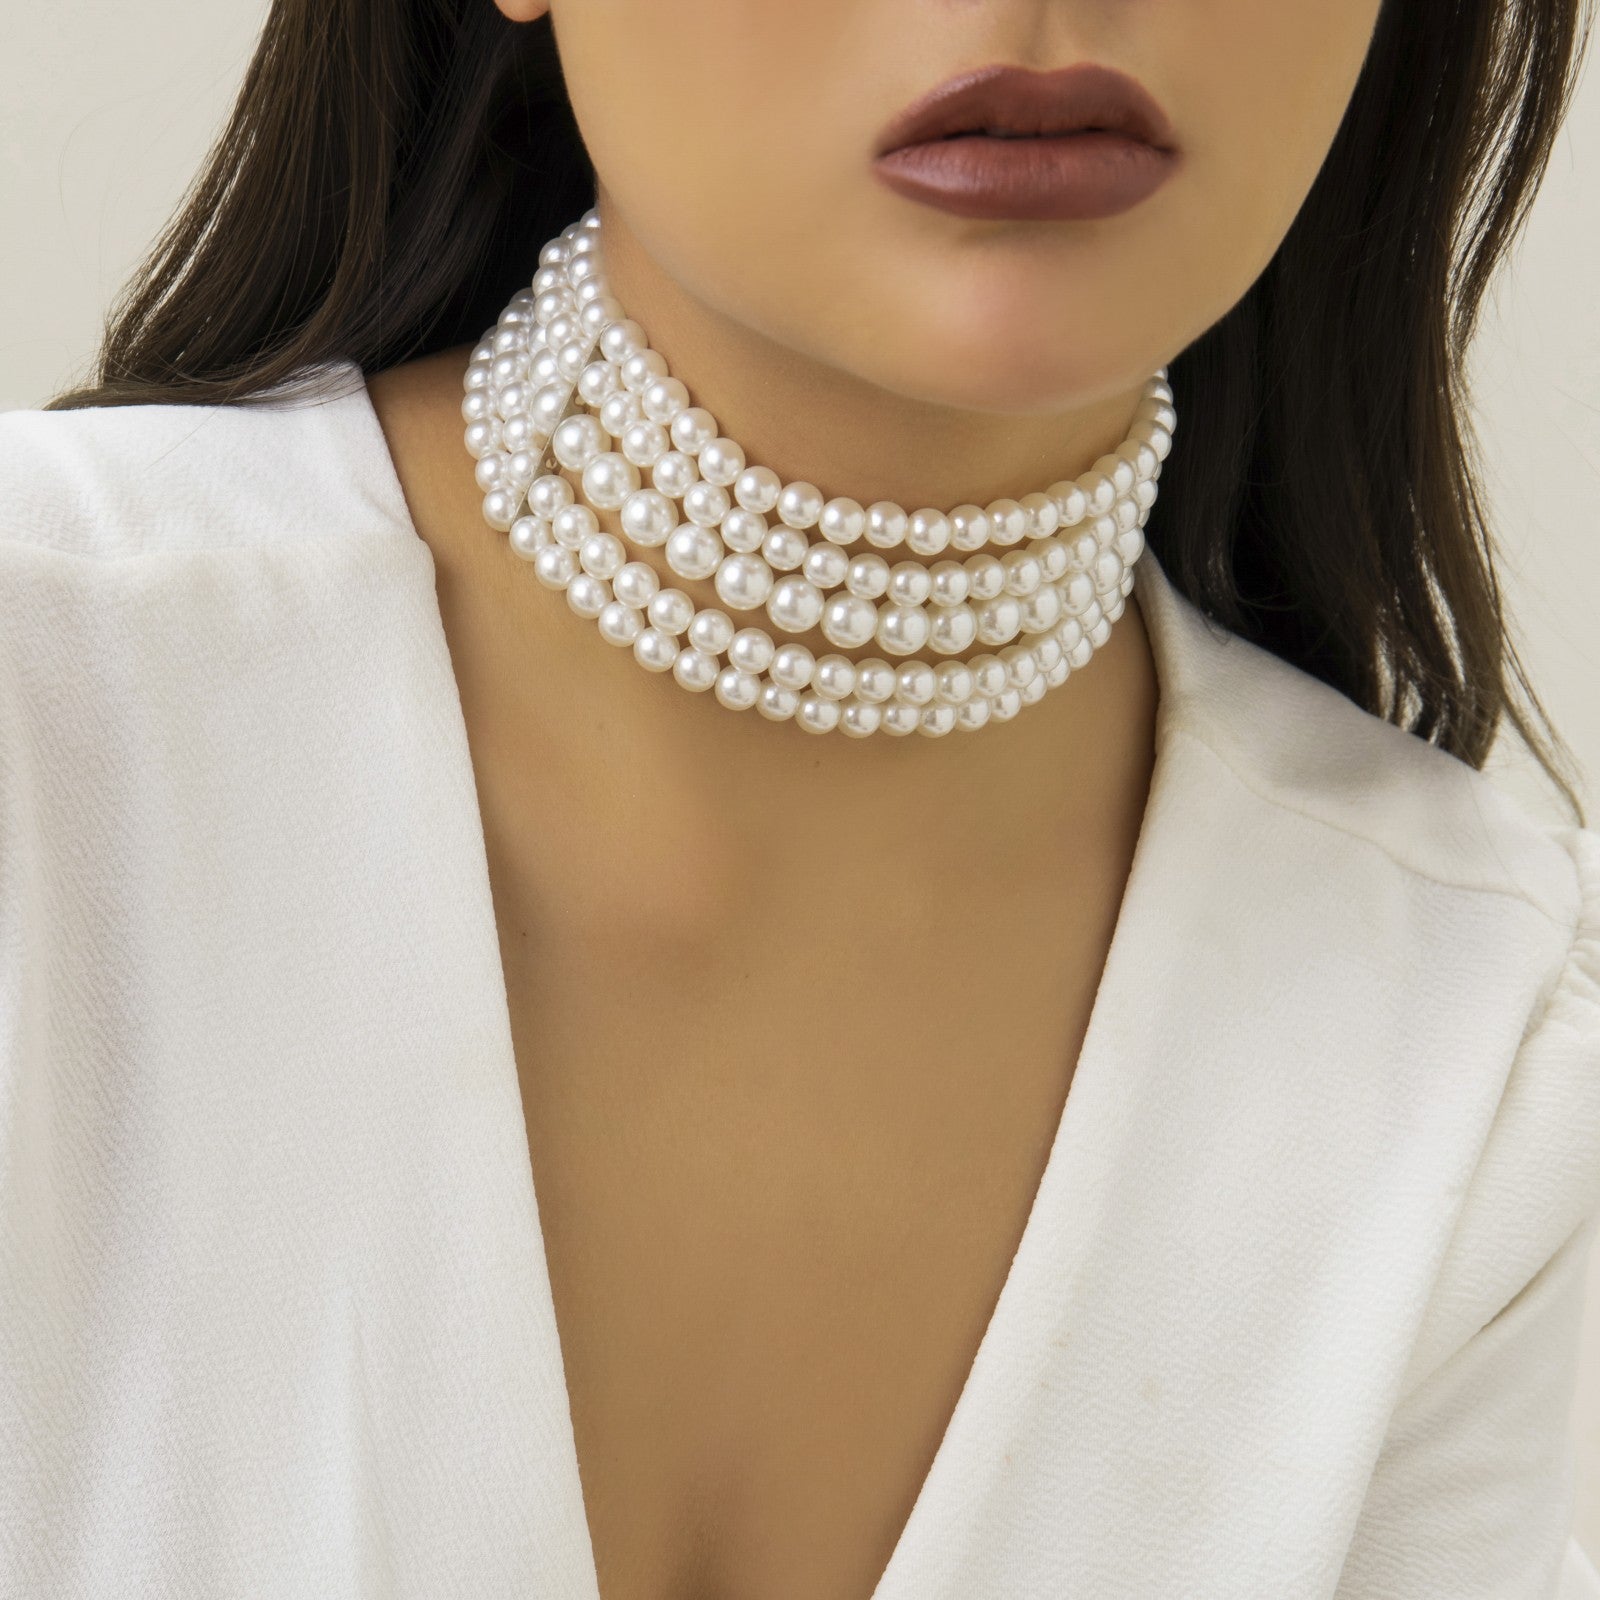 Chain made of artificial beads, white